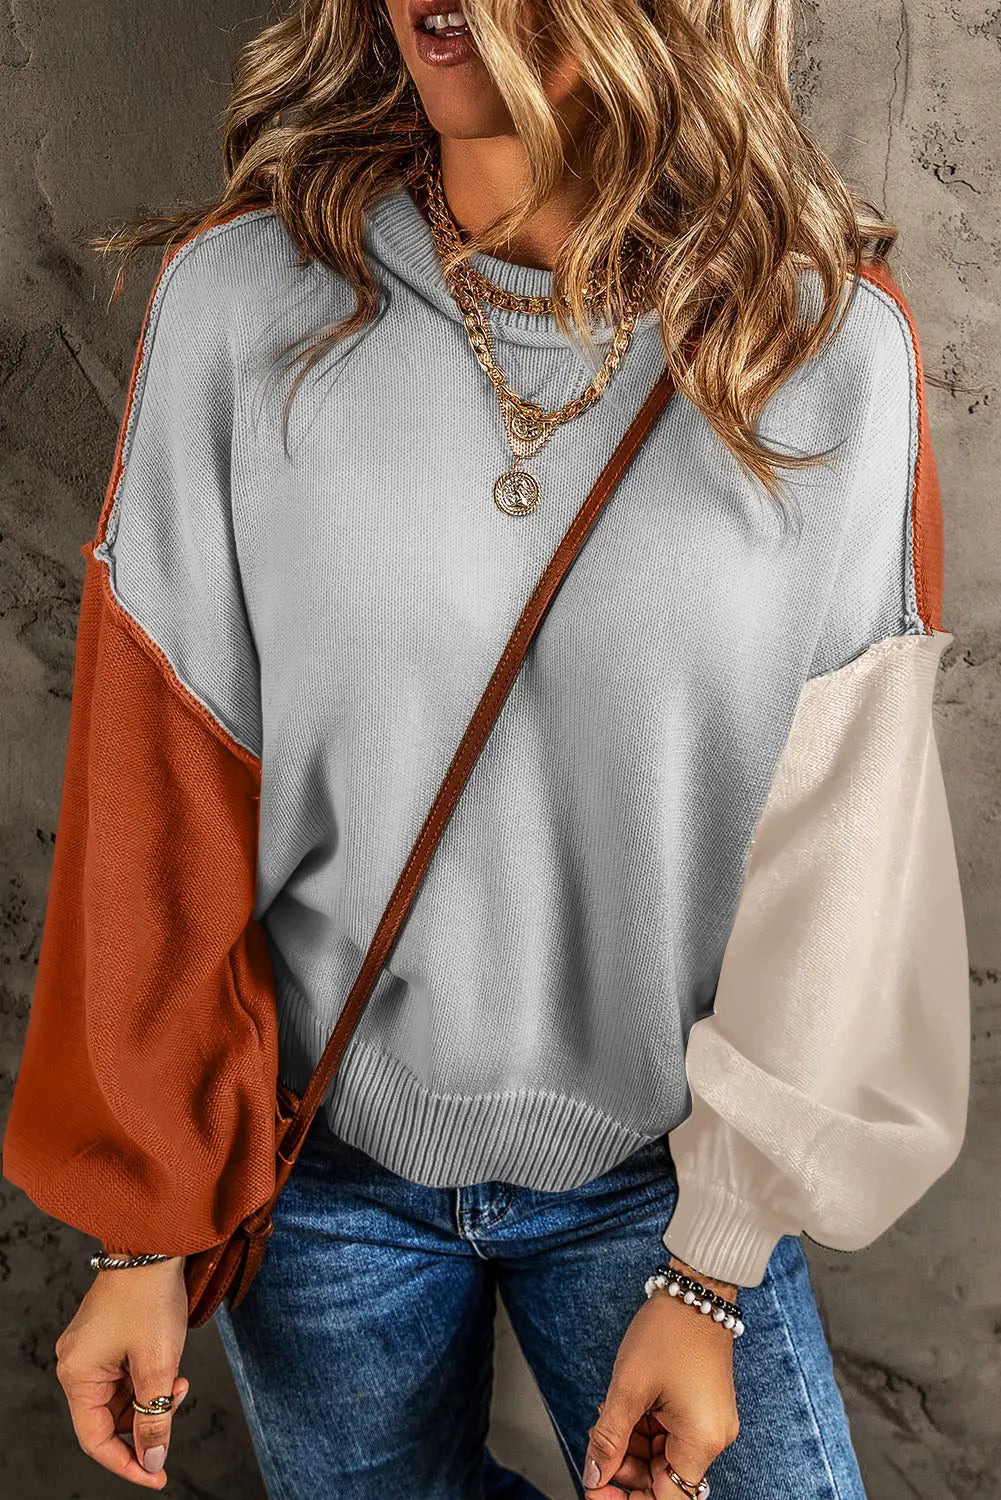 Chicory coffee color block exposed seam loose fit sweater - gray / s / 55% acrylic + 45% cotton - tops